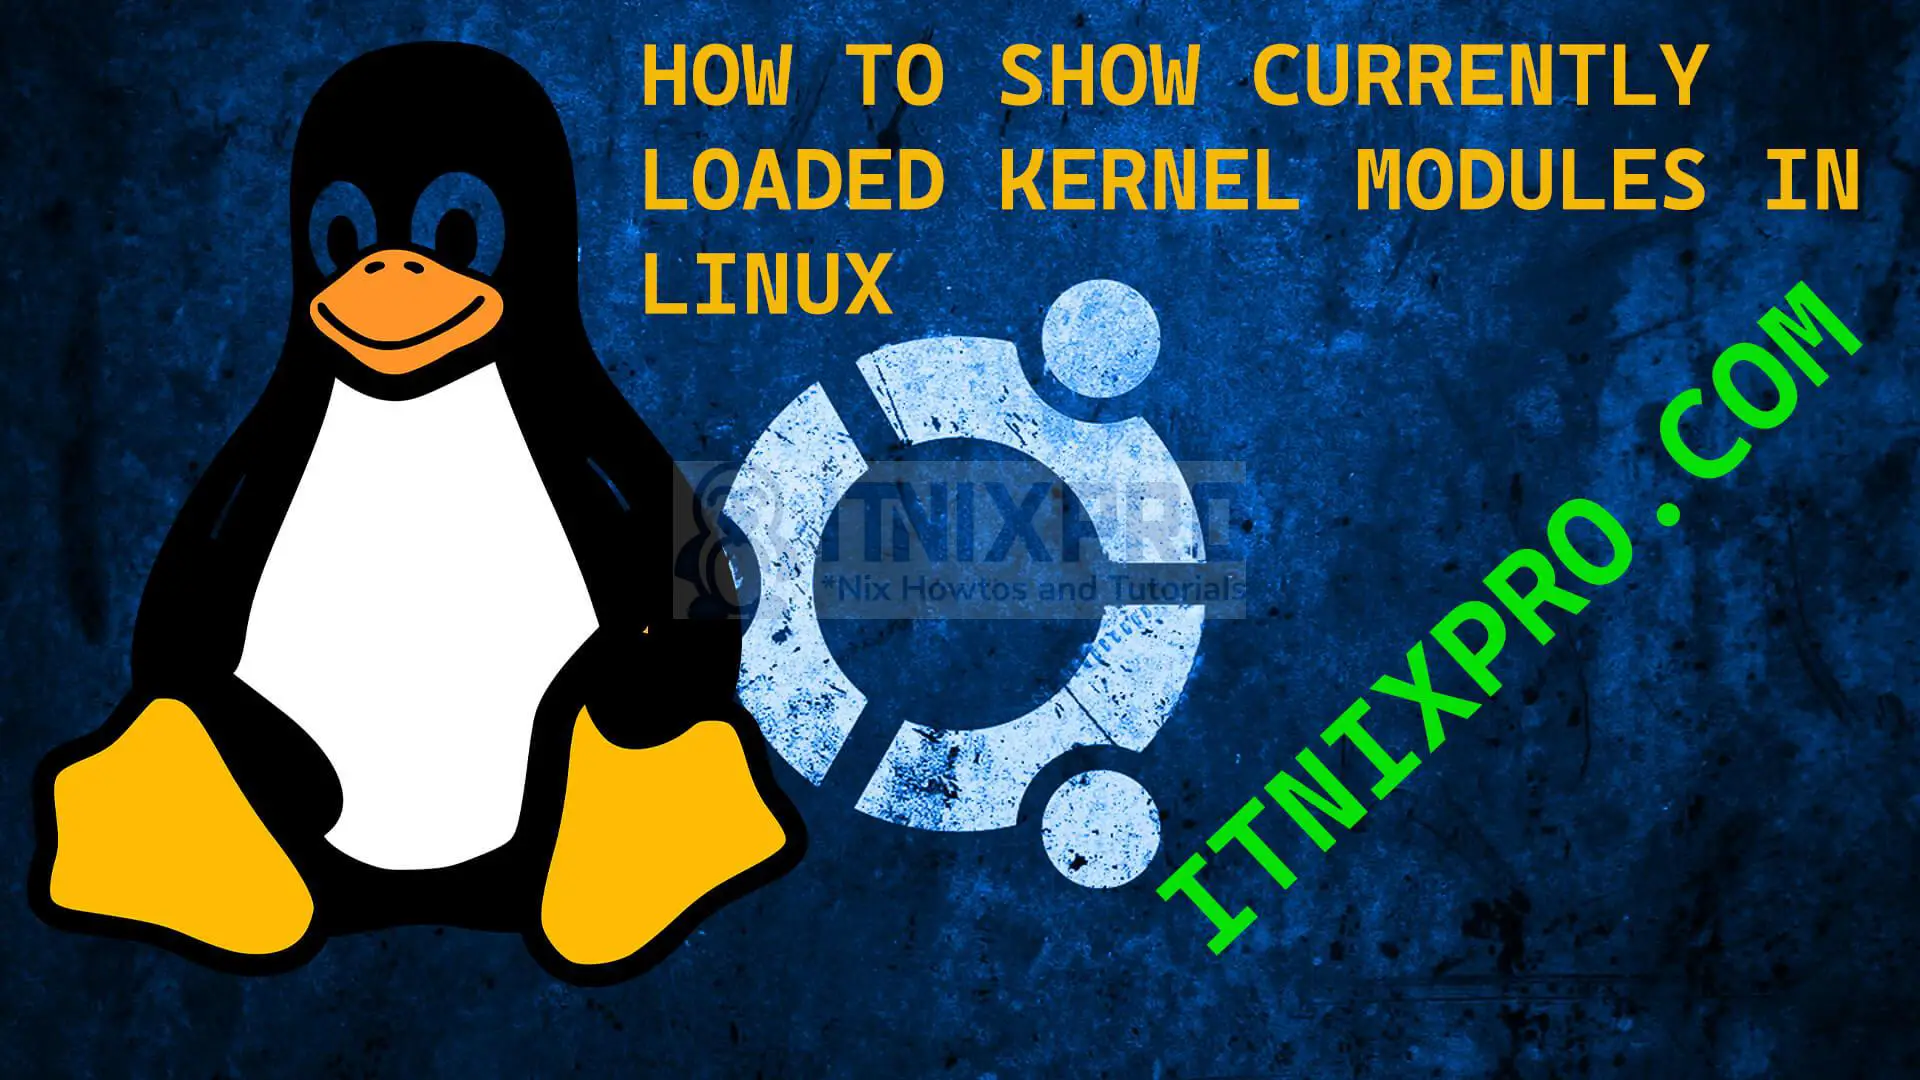 How to show currently loaded kernel modules in Linux